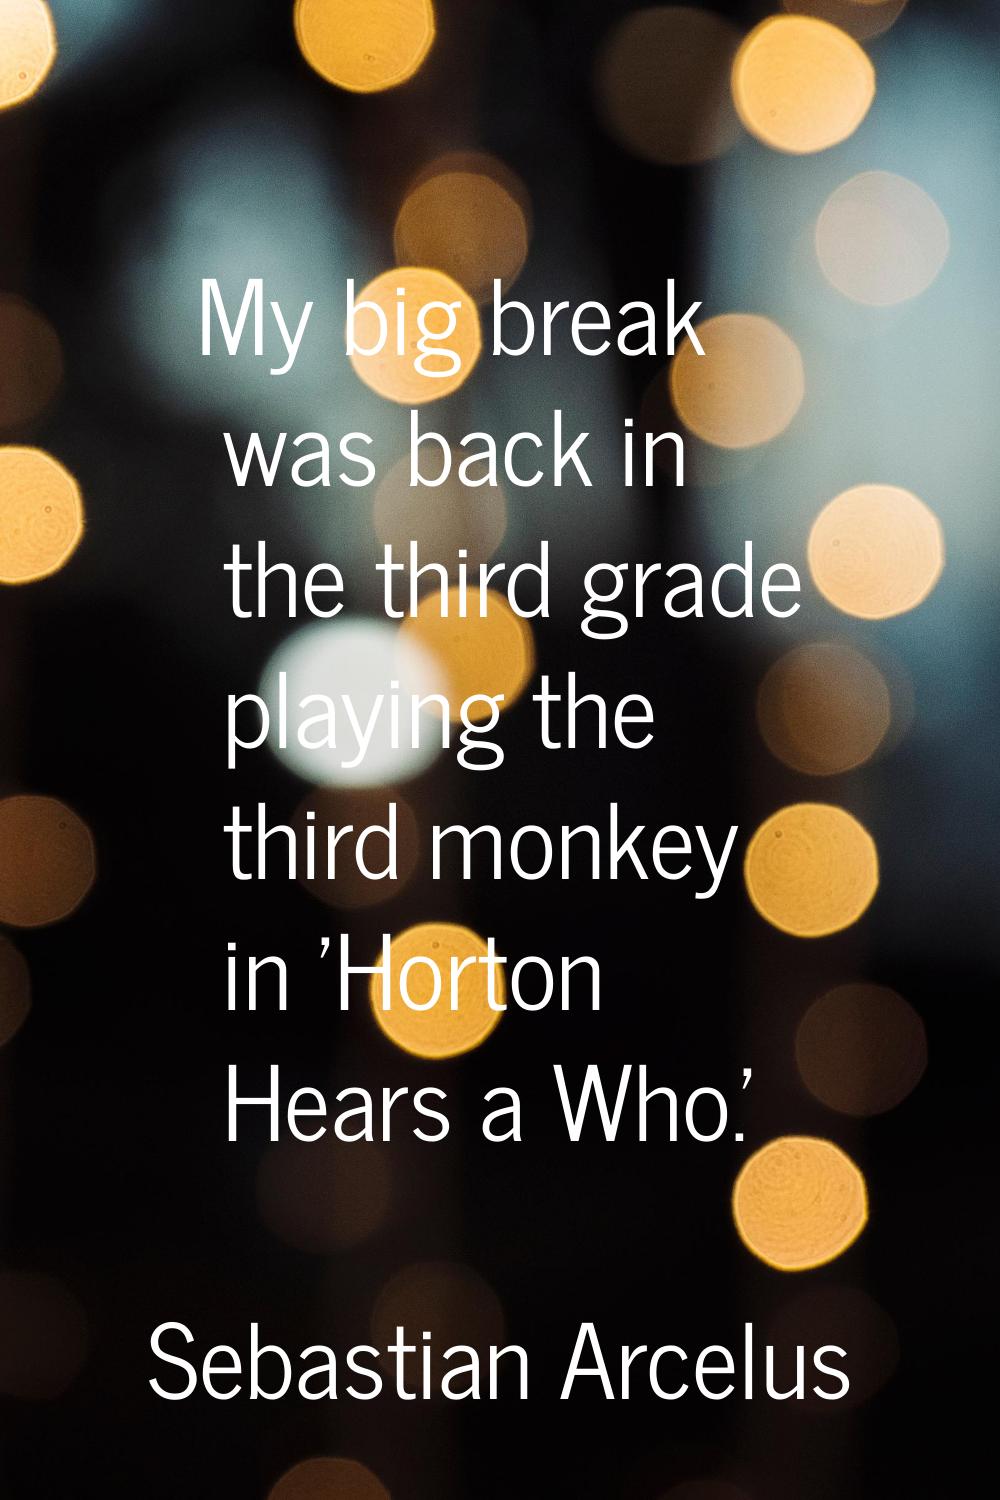 My big break was back in the third grade playing the third monkey in 'Horton Hears a Who.'